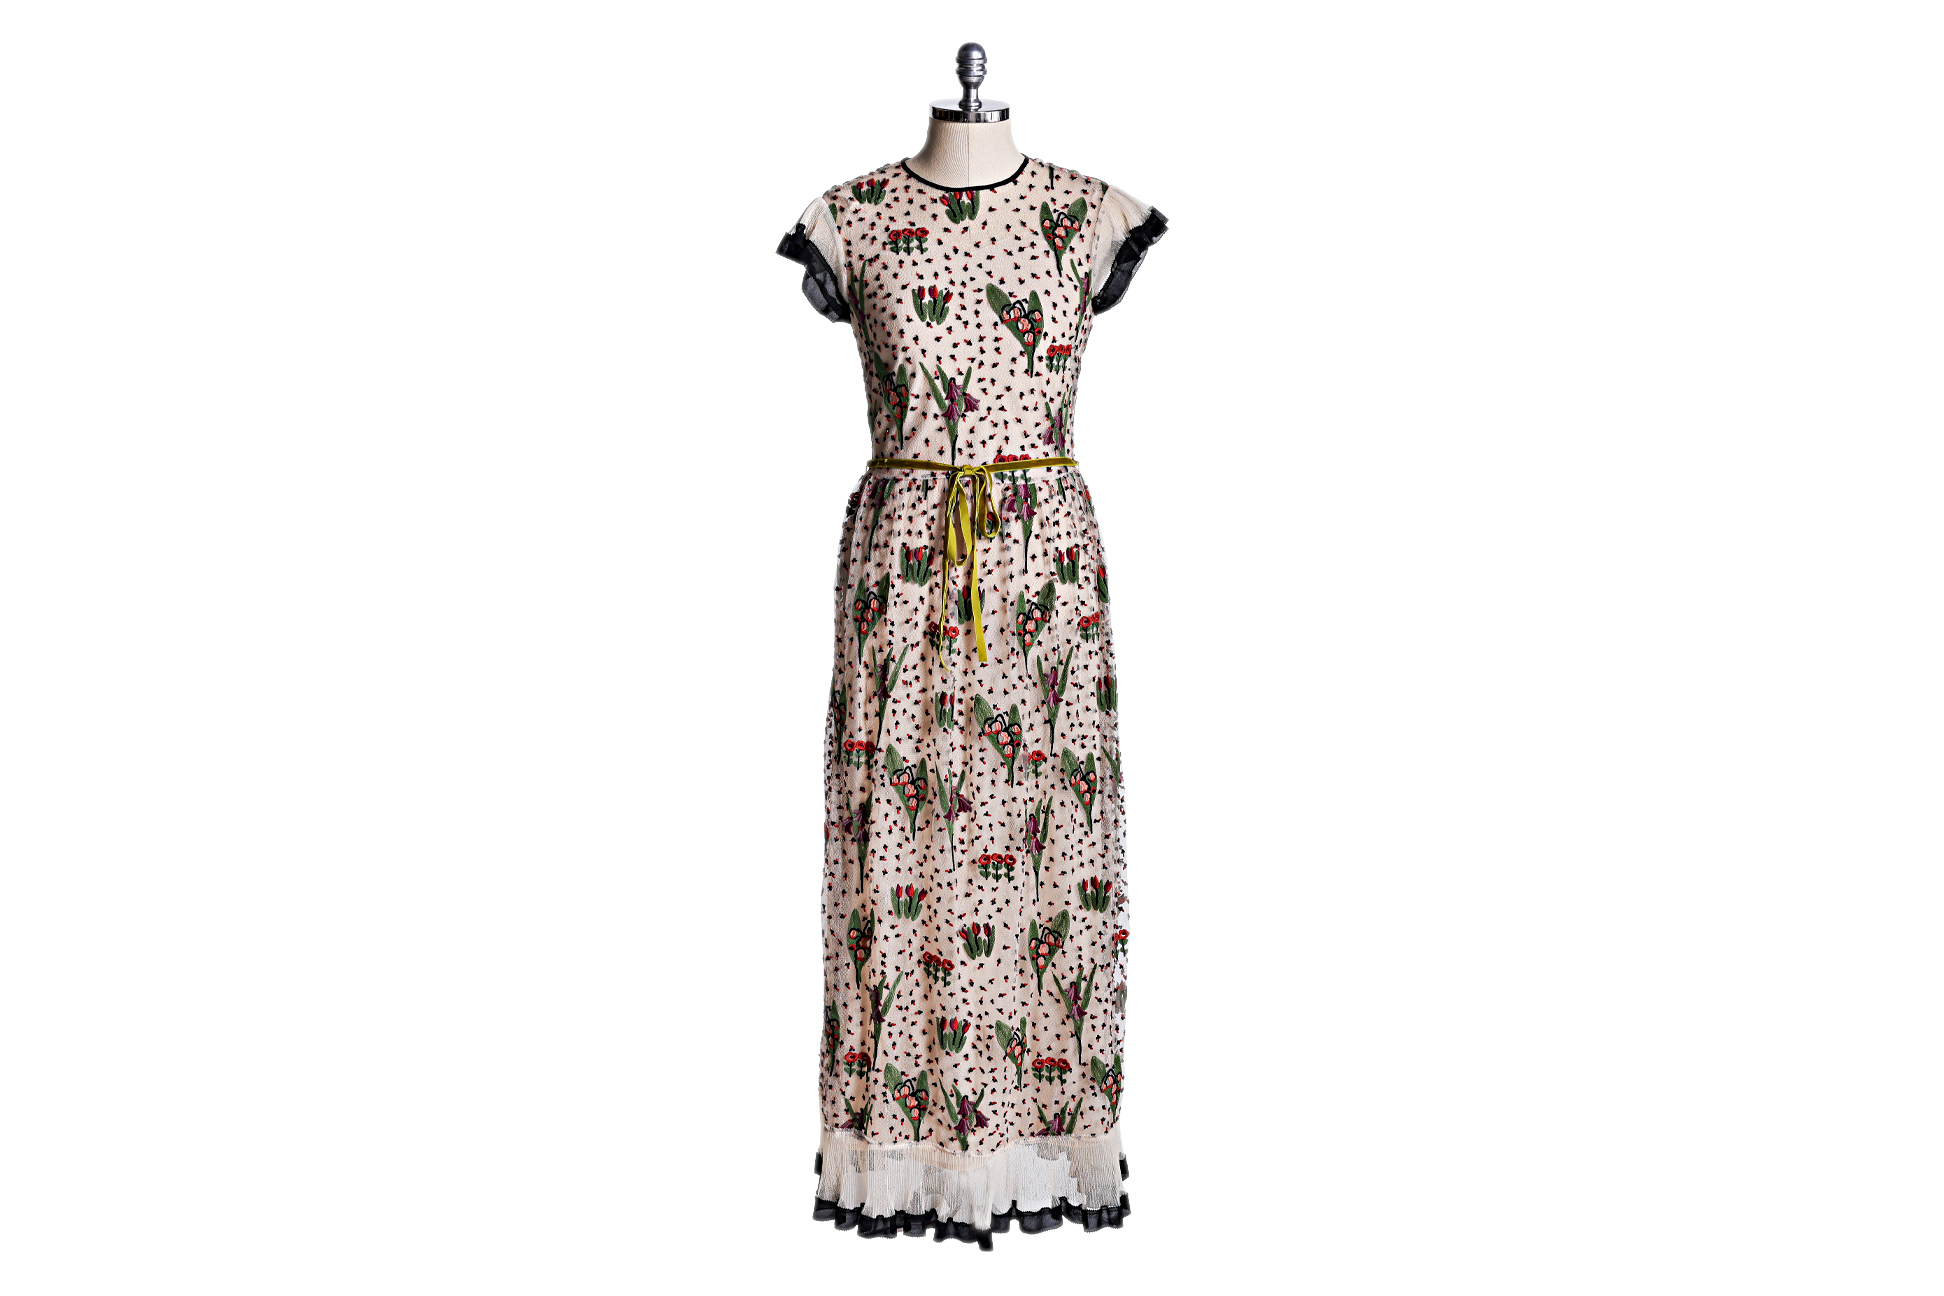 A RED VALENTINO GARDEN EMBROIDERED DRESS